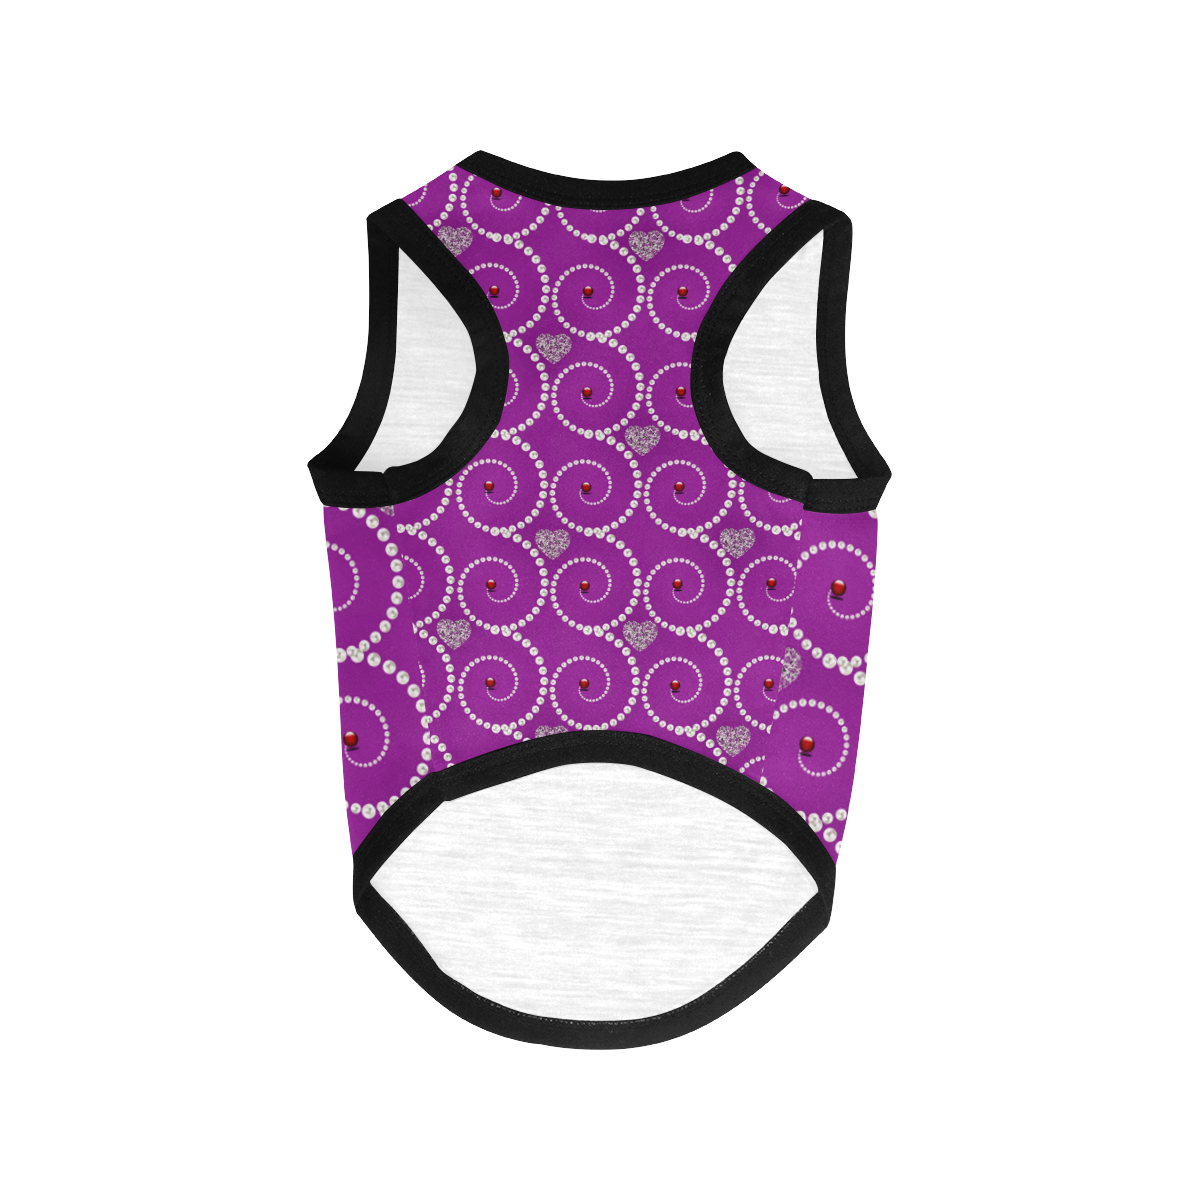 Silver hearts and pearls of white -purple dog coat All Over Print Pet Tank Top